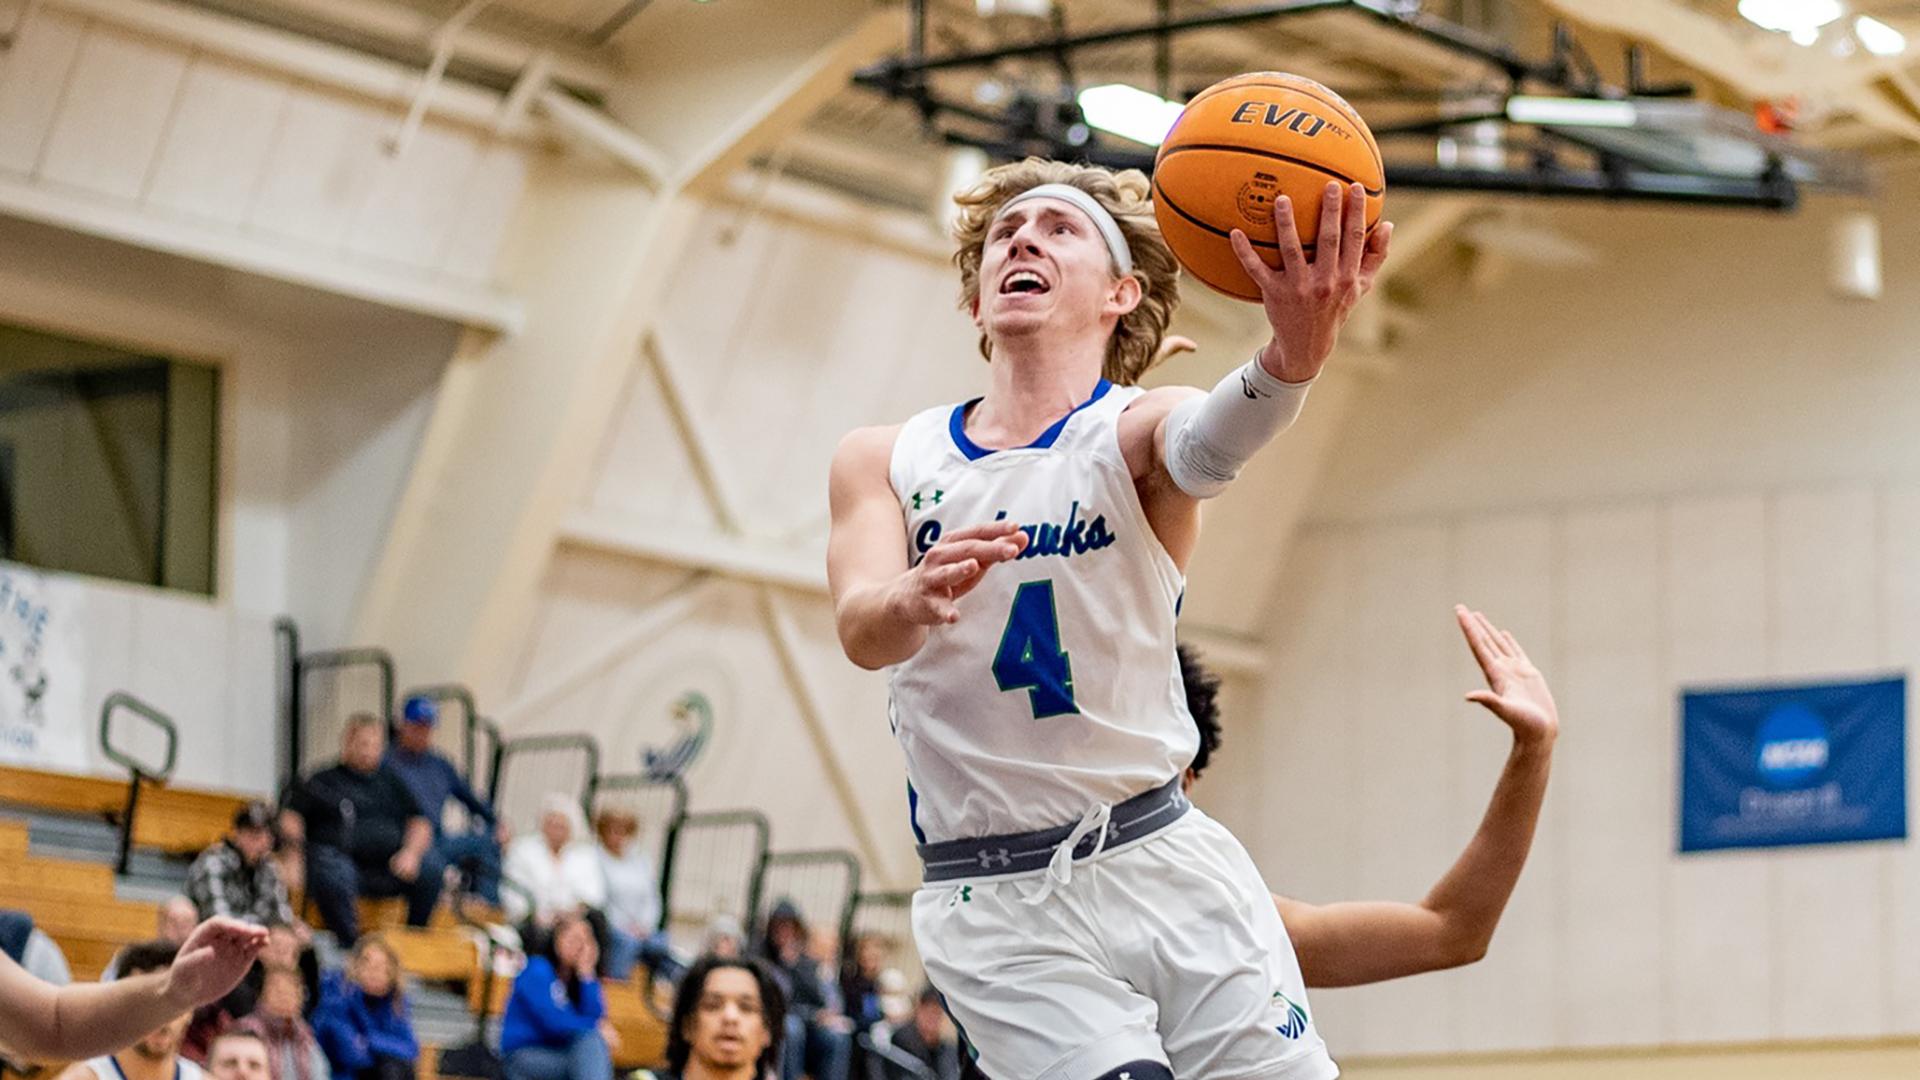 Clay Brochu scored a season-high 27 points to lead Salve Regina men's basketball to a season-finale win over Emerson, 84-73. (Photo by George Corrigan '22)